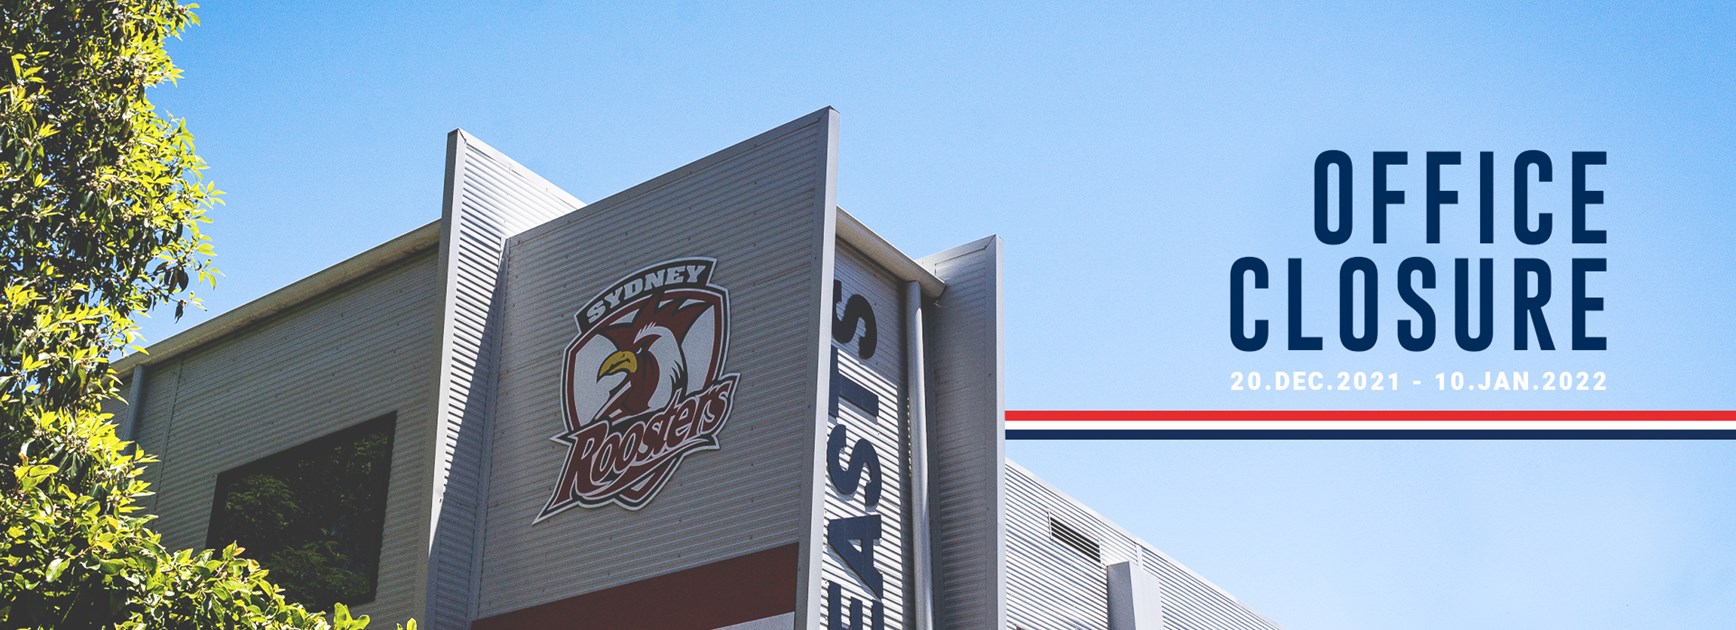 Sydney Roosters Office Closure Hours